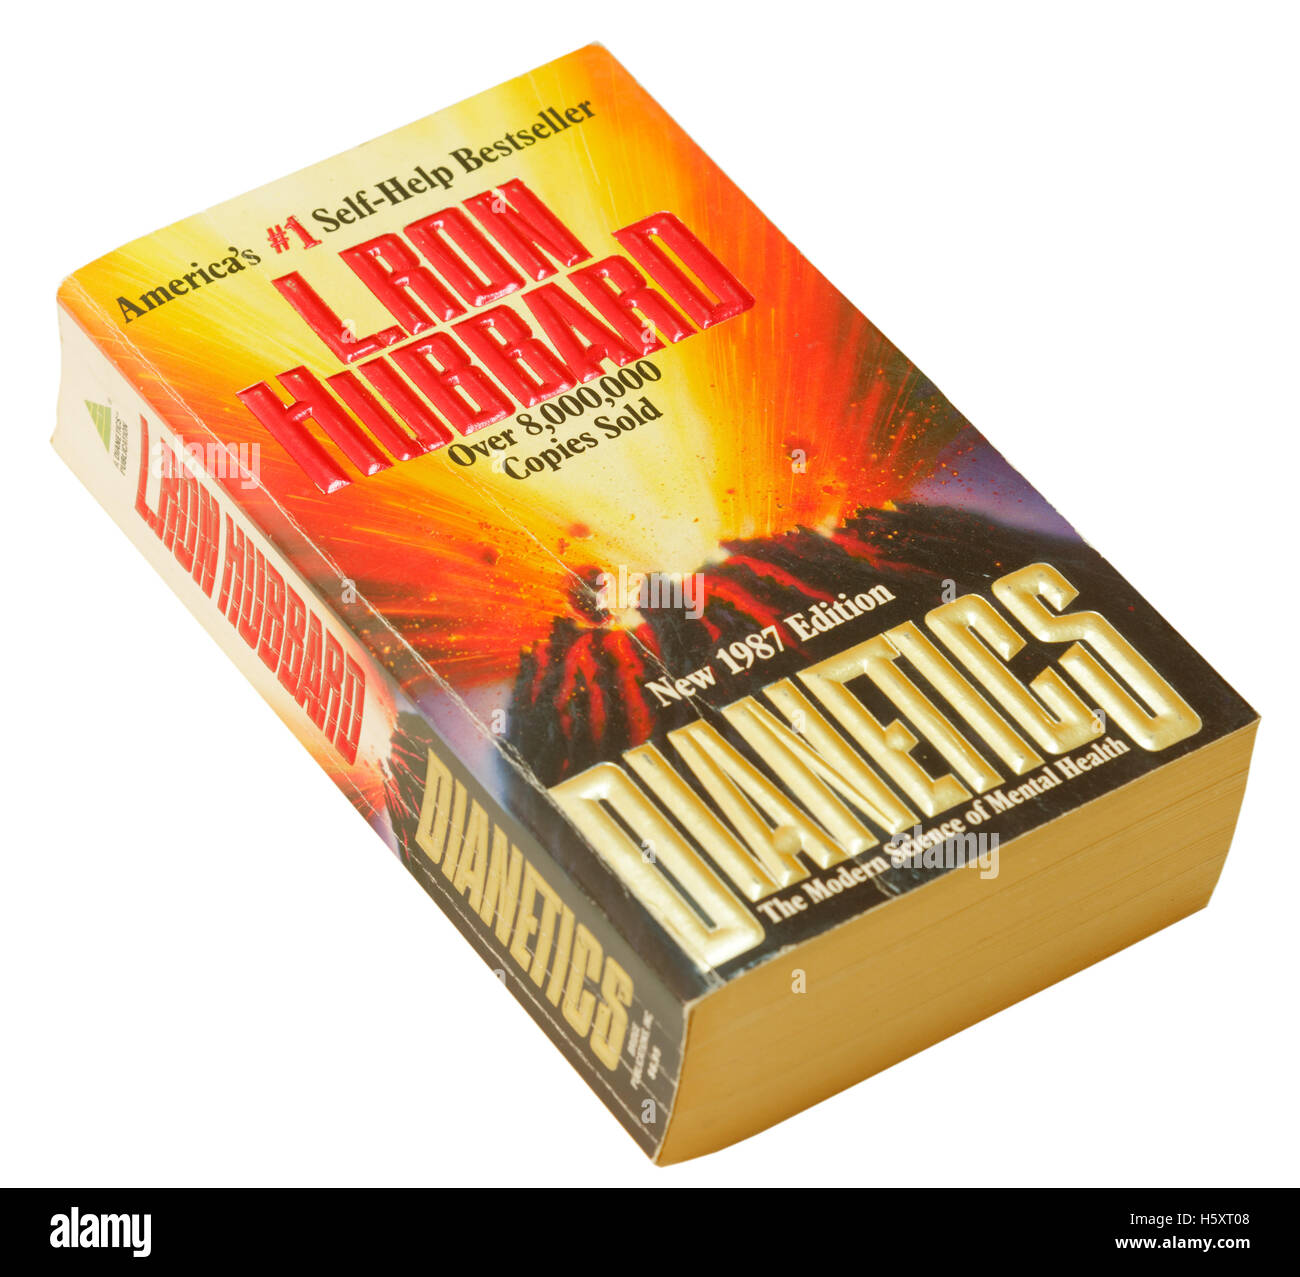 Dianetics by L Ron Hubbard Stock Photo